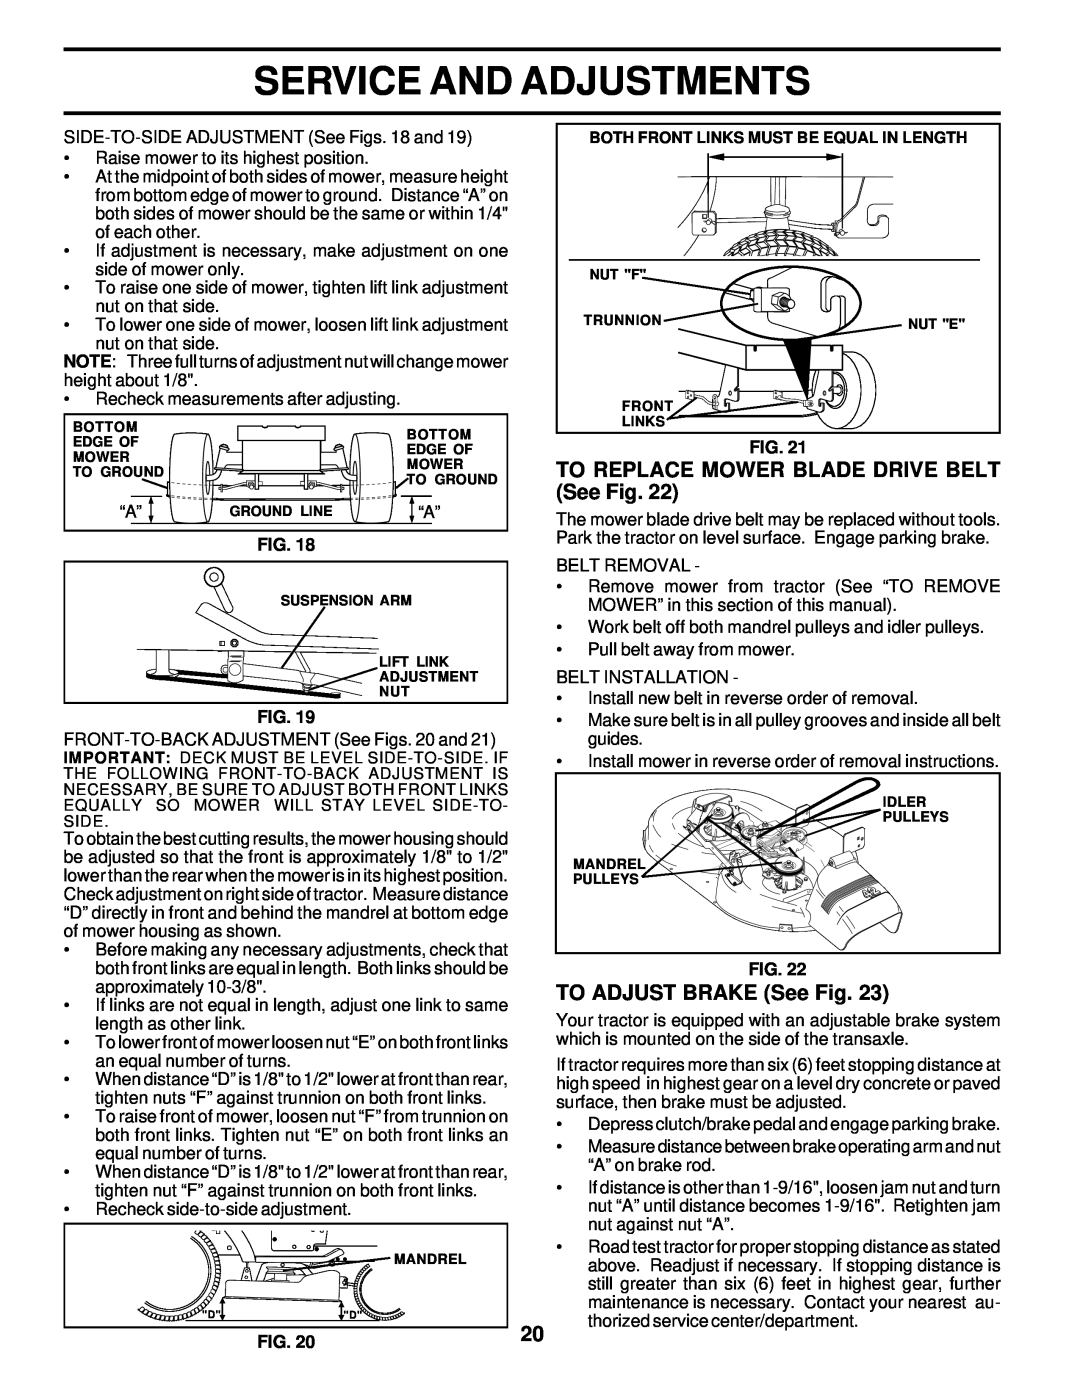 Poulan PRK17H42STB owner manual TO REPLACE MOWER BLADE DRIVE BELT See Fig, TO ADJUST BRAKE See Fig, Service And Adjustments 